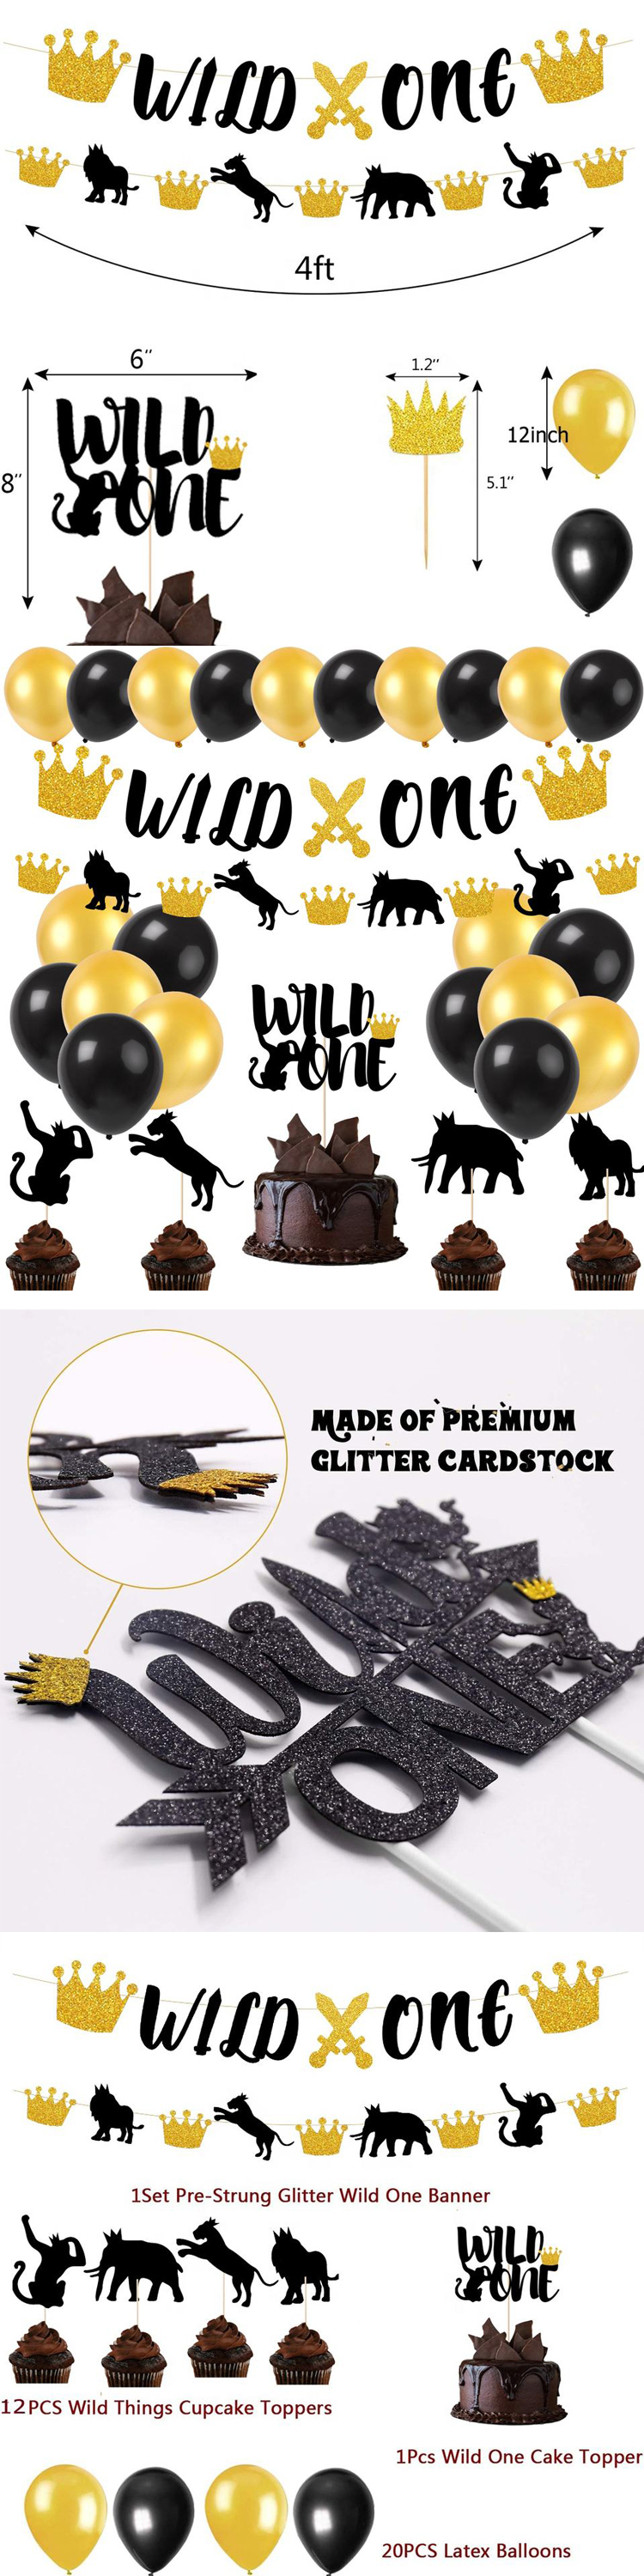 PAFU Wild One Party Supplies Glitter Wild One Banner With Arrow Cake Topper Black Gold Balloons 1st Birthday Decorations